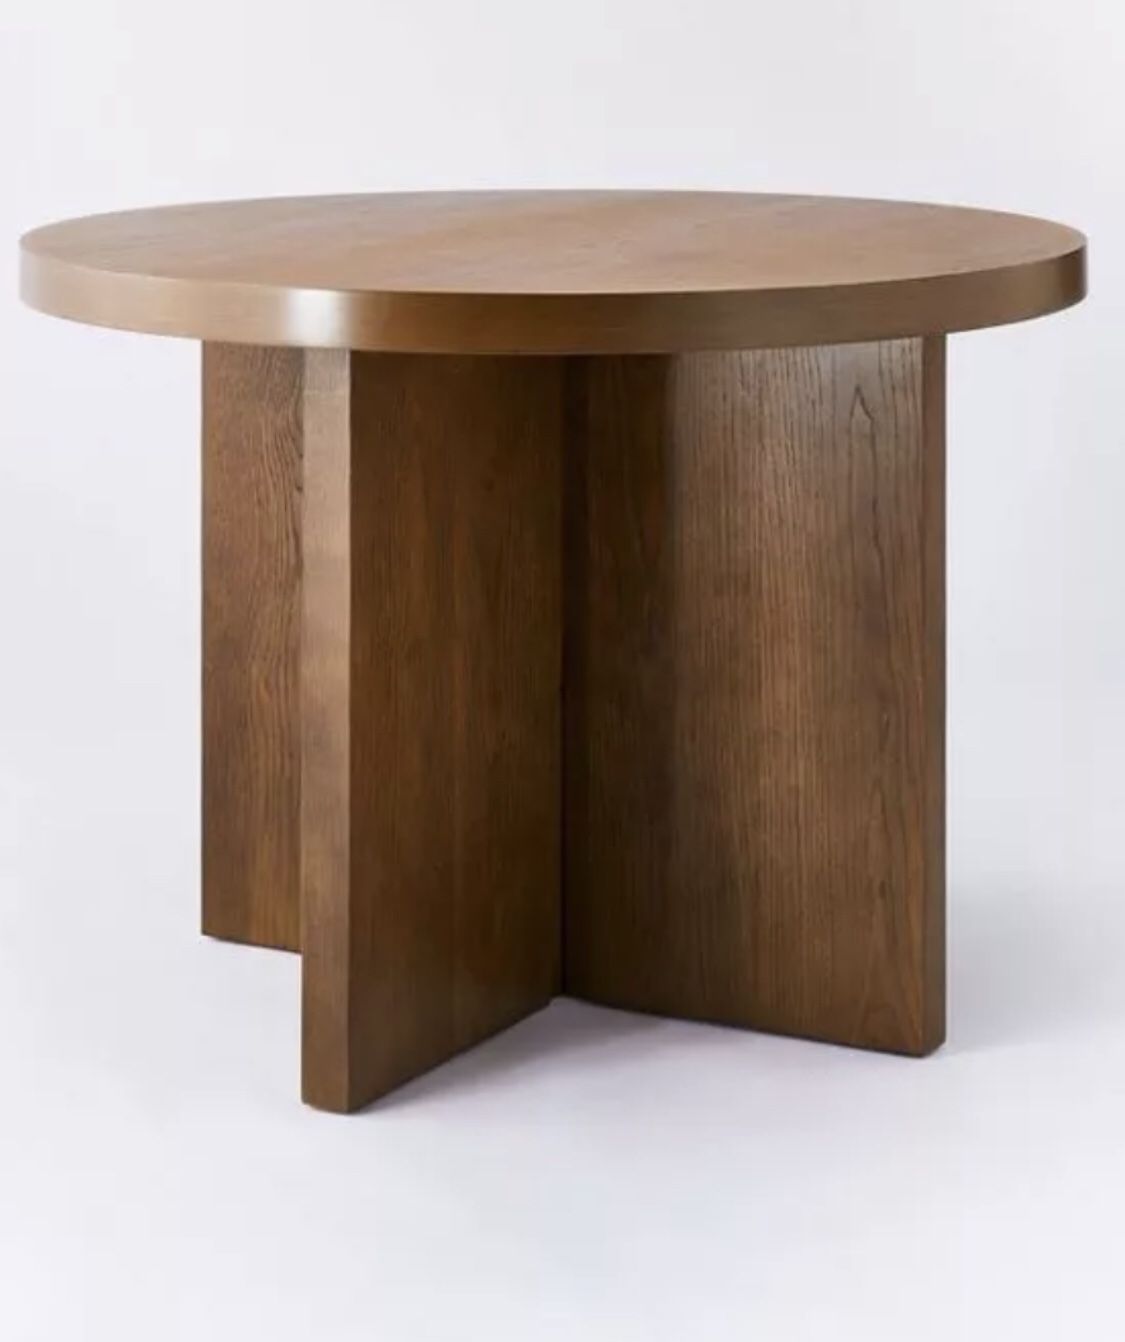 Target x Studio Mcgee Round Dining Table